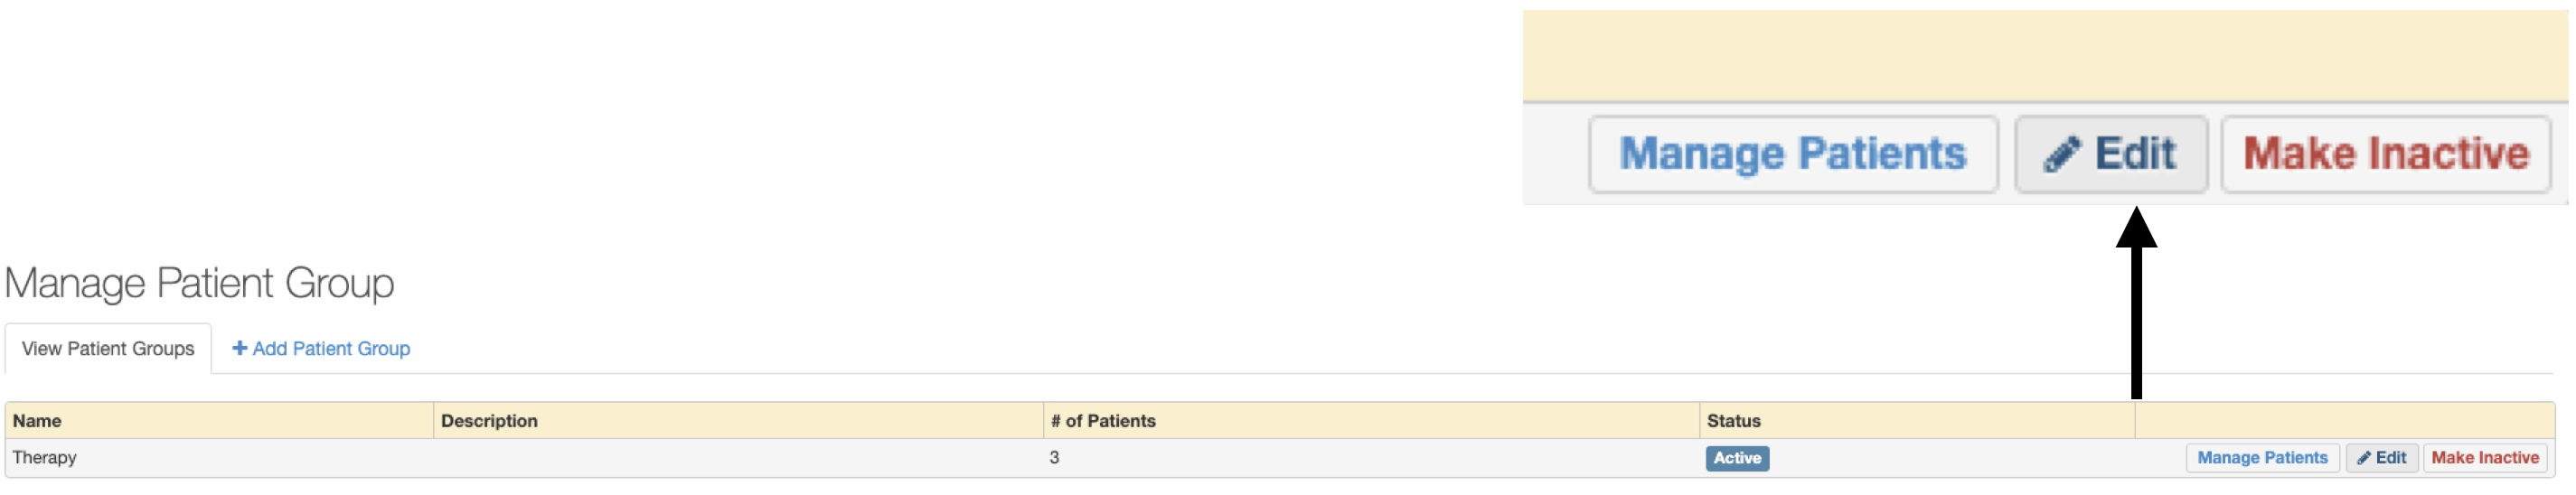 Patient_Group_Example_Enlarged.png